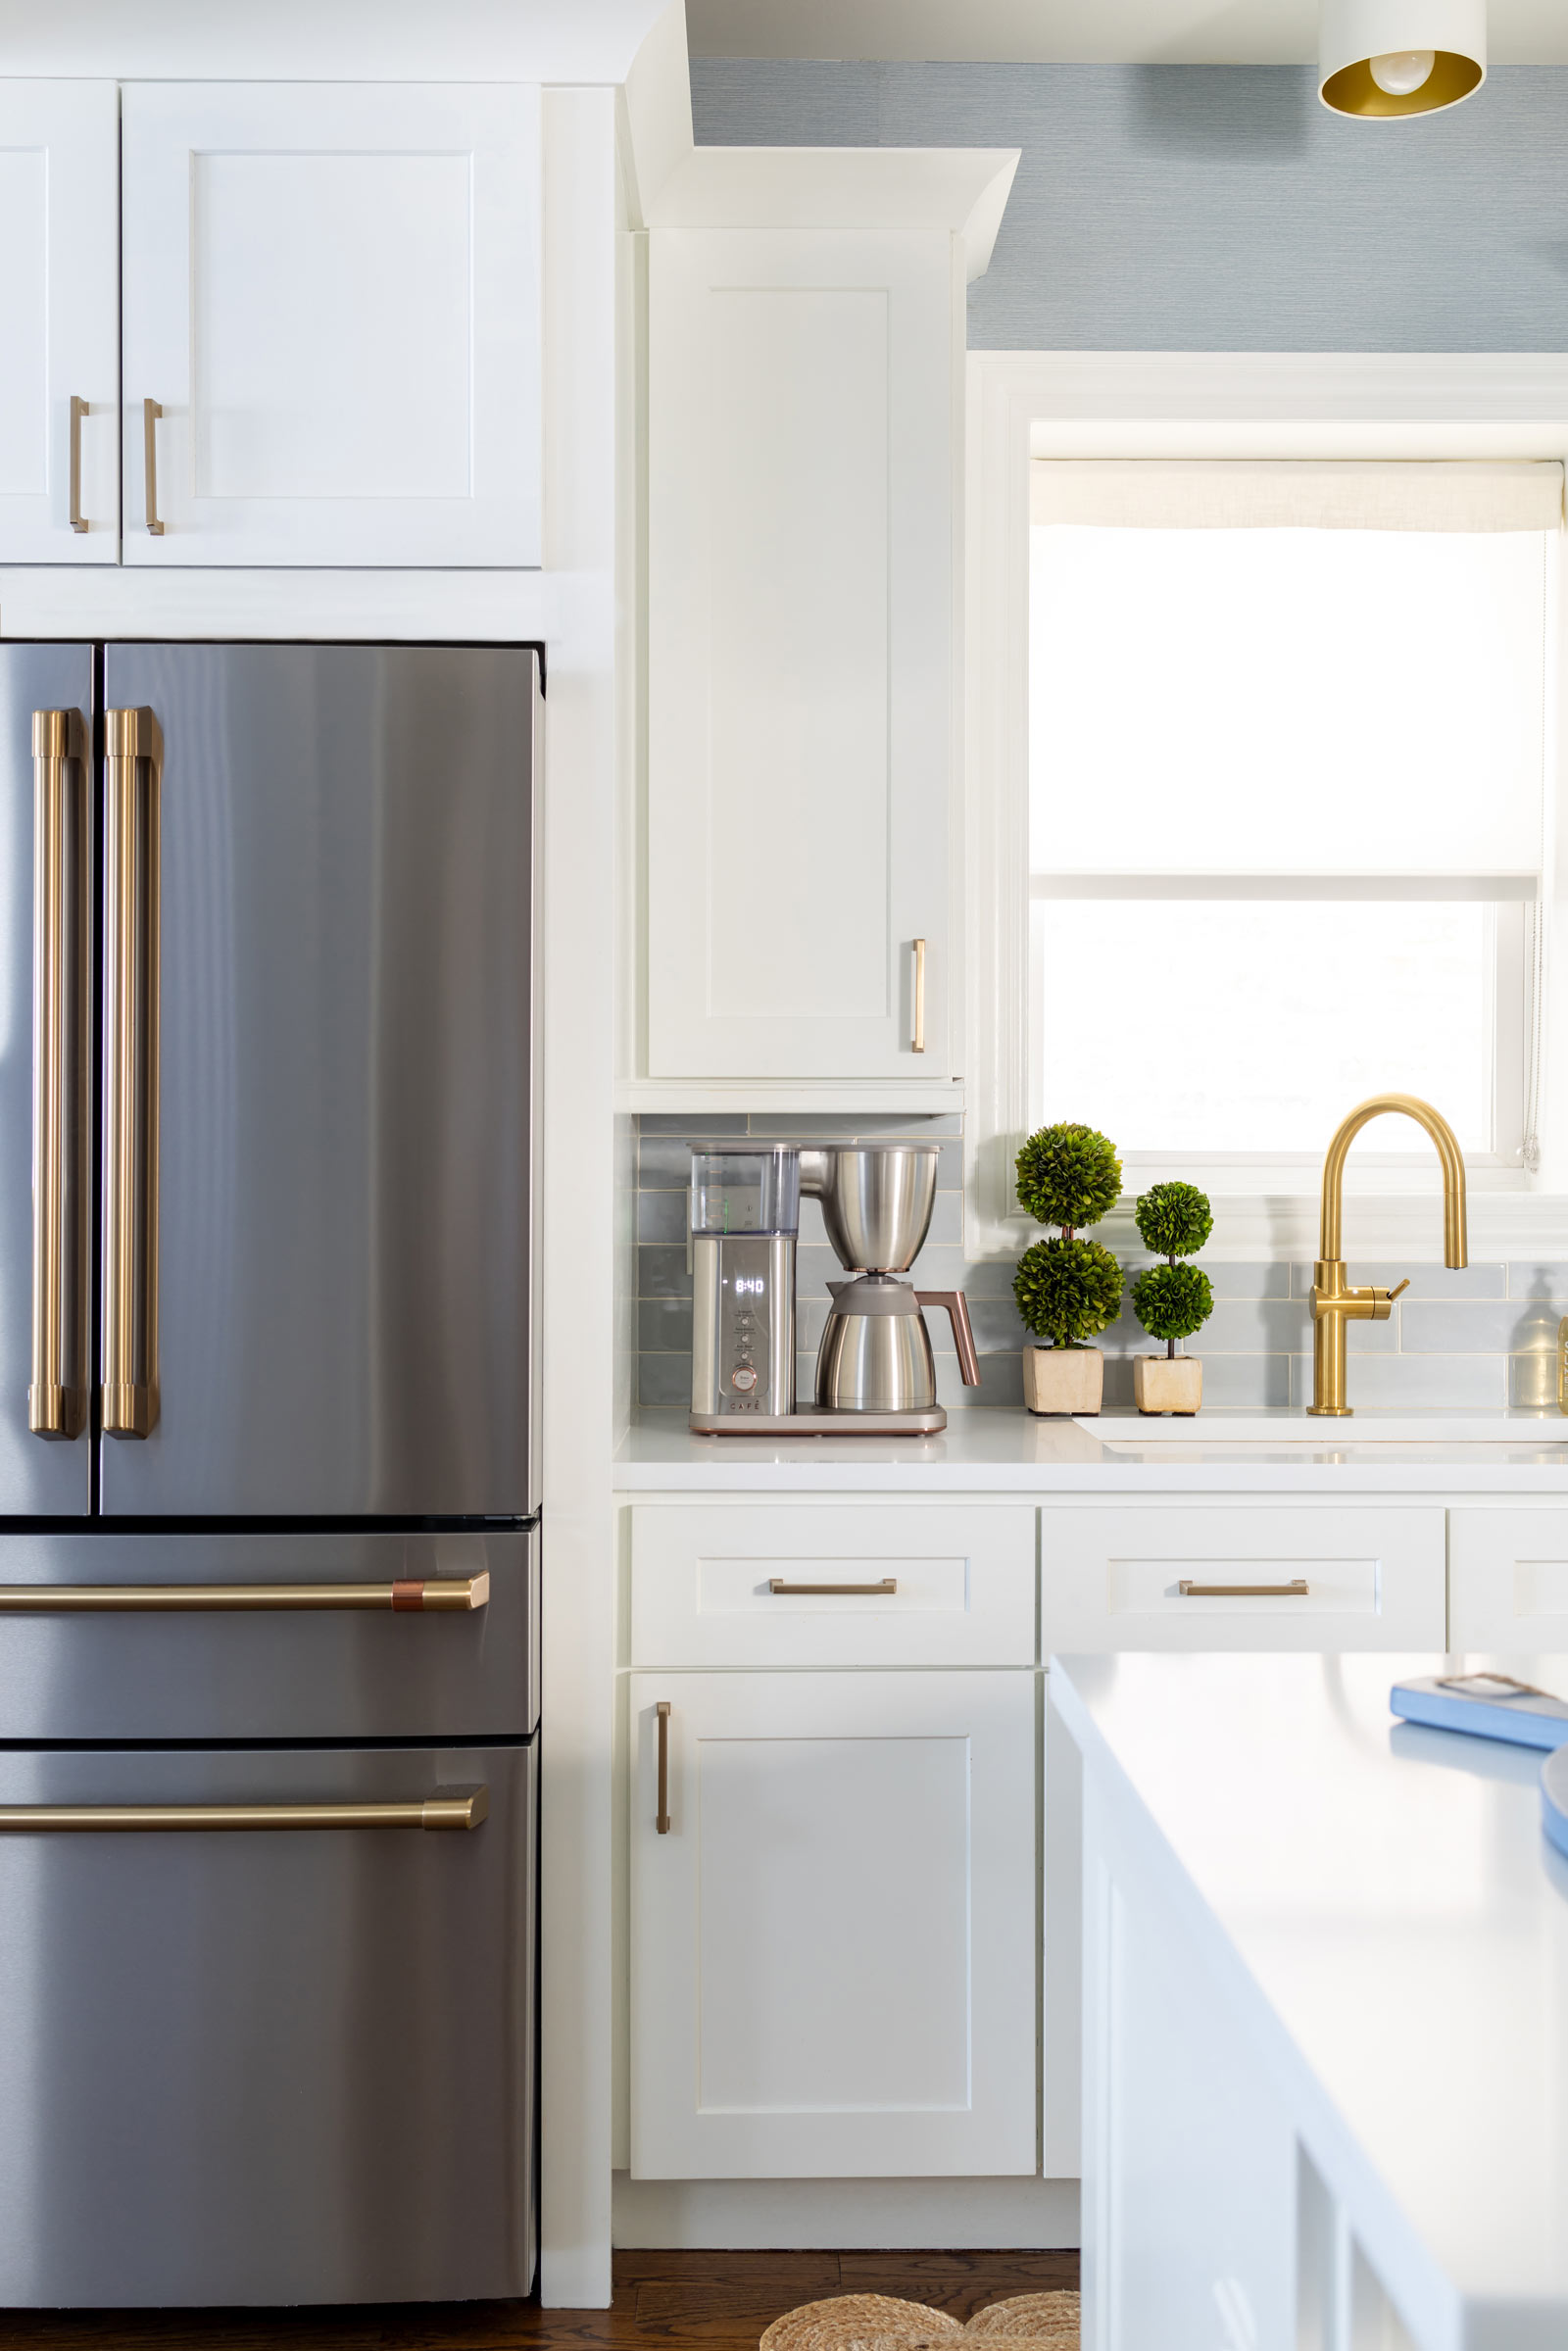 Elevating Our Kitchen: A Full Kohler and Café Appliances Review